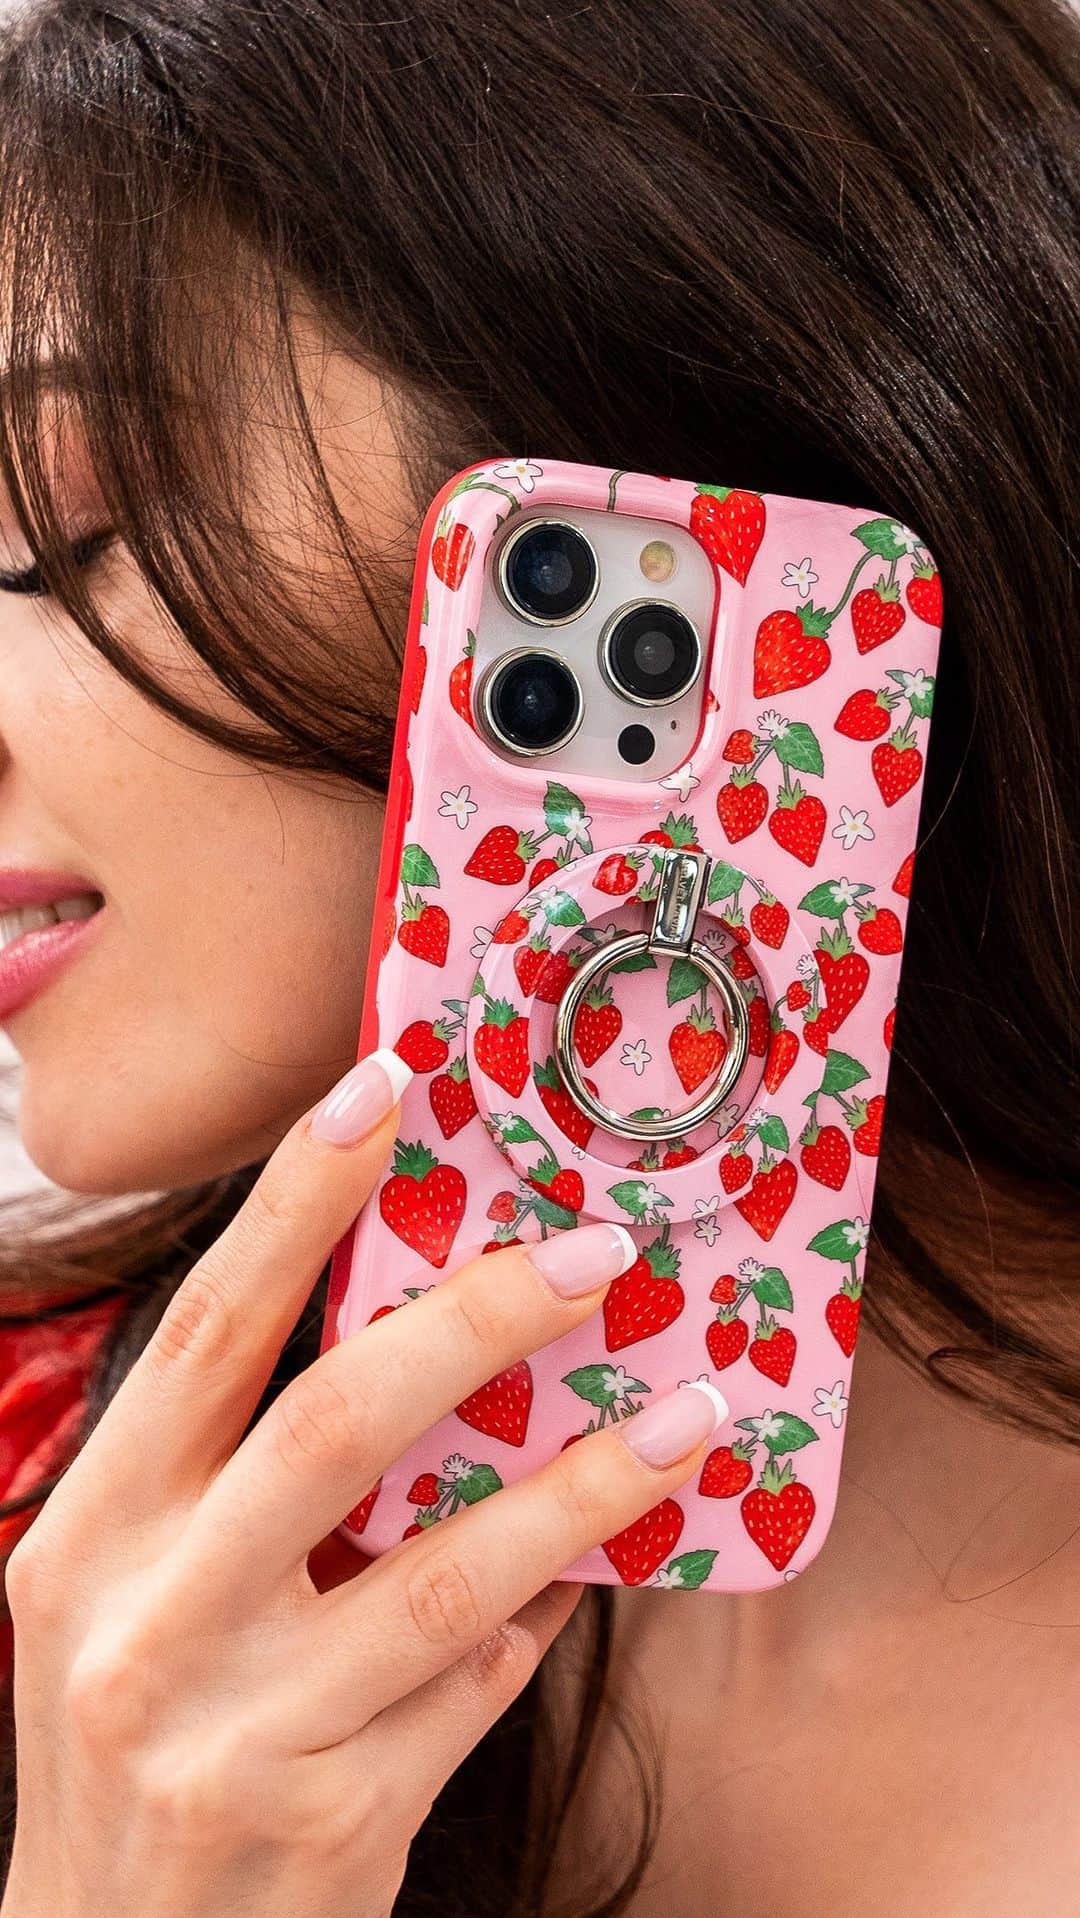 VELVETCAVIARのインスタグラム：「🍓 JUST DROPPED 🍒 Our Berries and Cherries Collection is here! 2 Limited Edition Phone Cases inspired by the perfect summer picnic.  🍒 Matching Accessories 🍓 8 foot drop protection 🍒 Scratch Resistant 🍓 MagSafe Compatible  Mon Cheri Cherry and Strawberry Sweethearts are available for both iPhone & Samsung. The Berries and Cherries Collection is a Summer ’23 Exclusive. So, once it’s gone it’s GONE! Shop our sweetest collection ever before it’s sold out.」